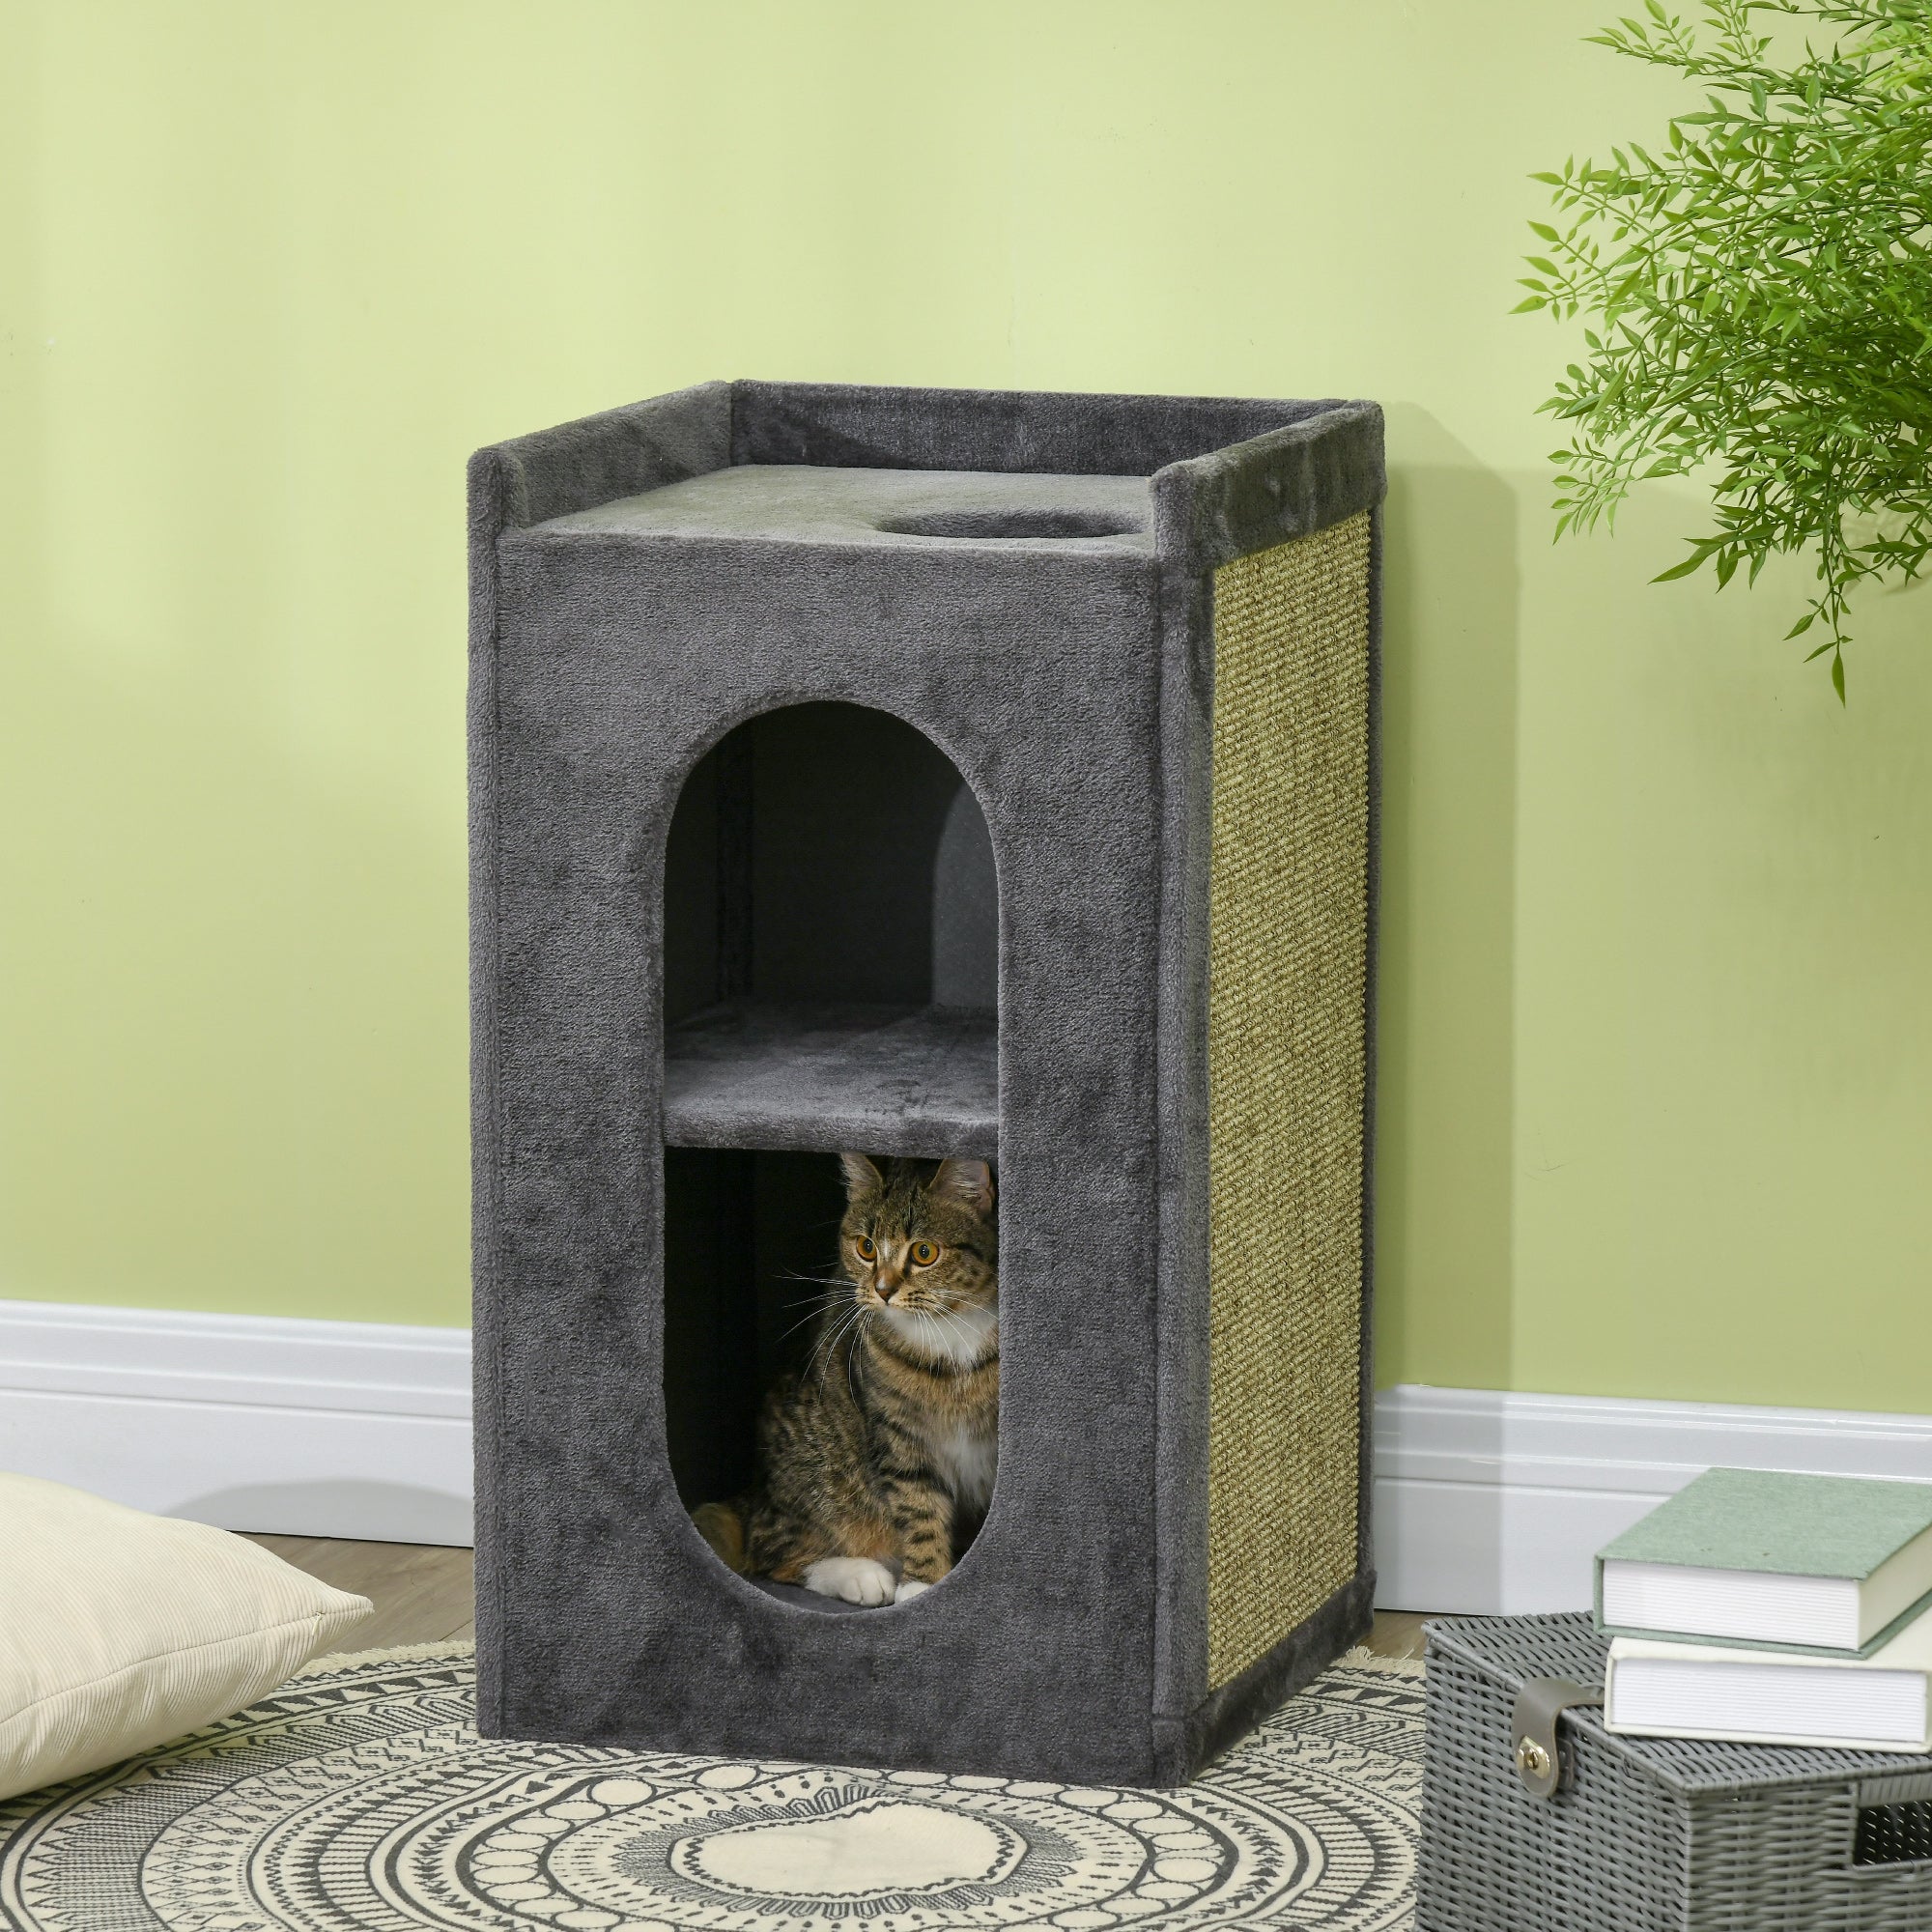 81cm Cat Scratching Barrel, with Two Cat Houses for Indoor Cats, Grey, PawHut,